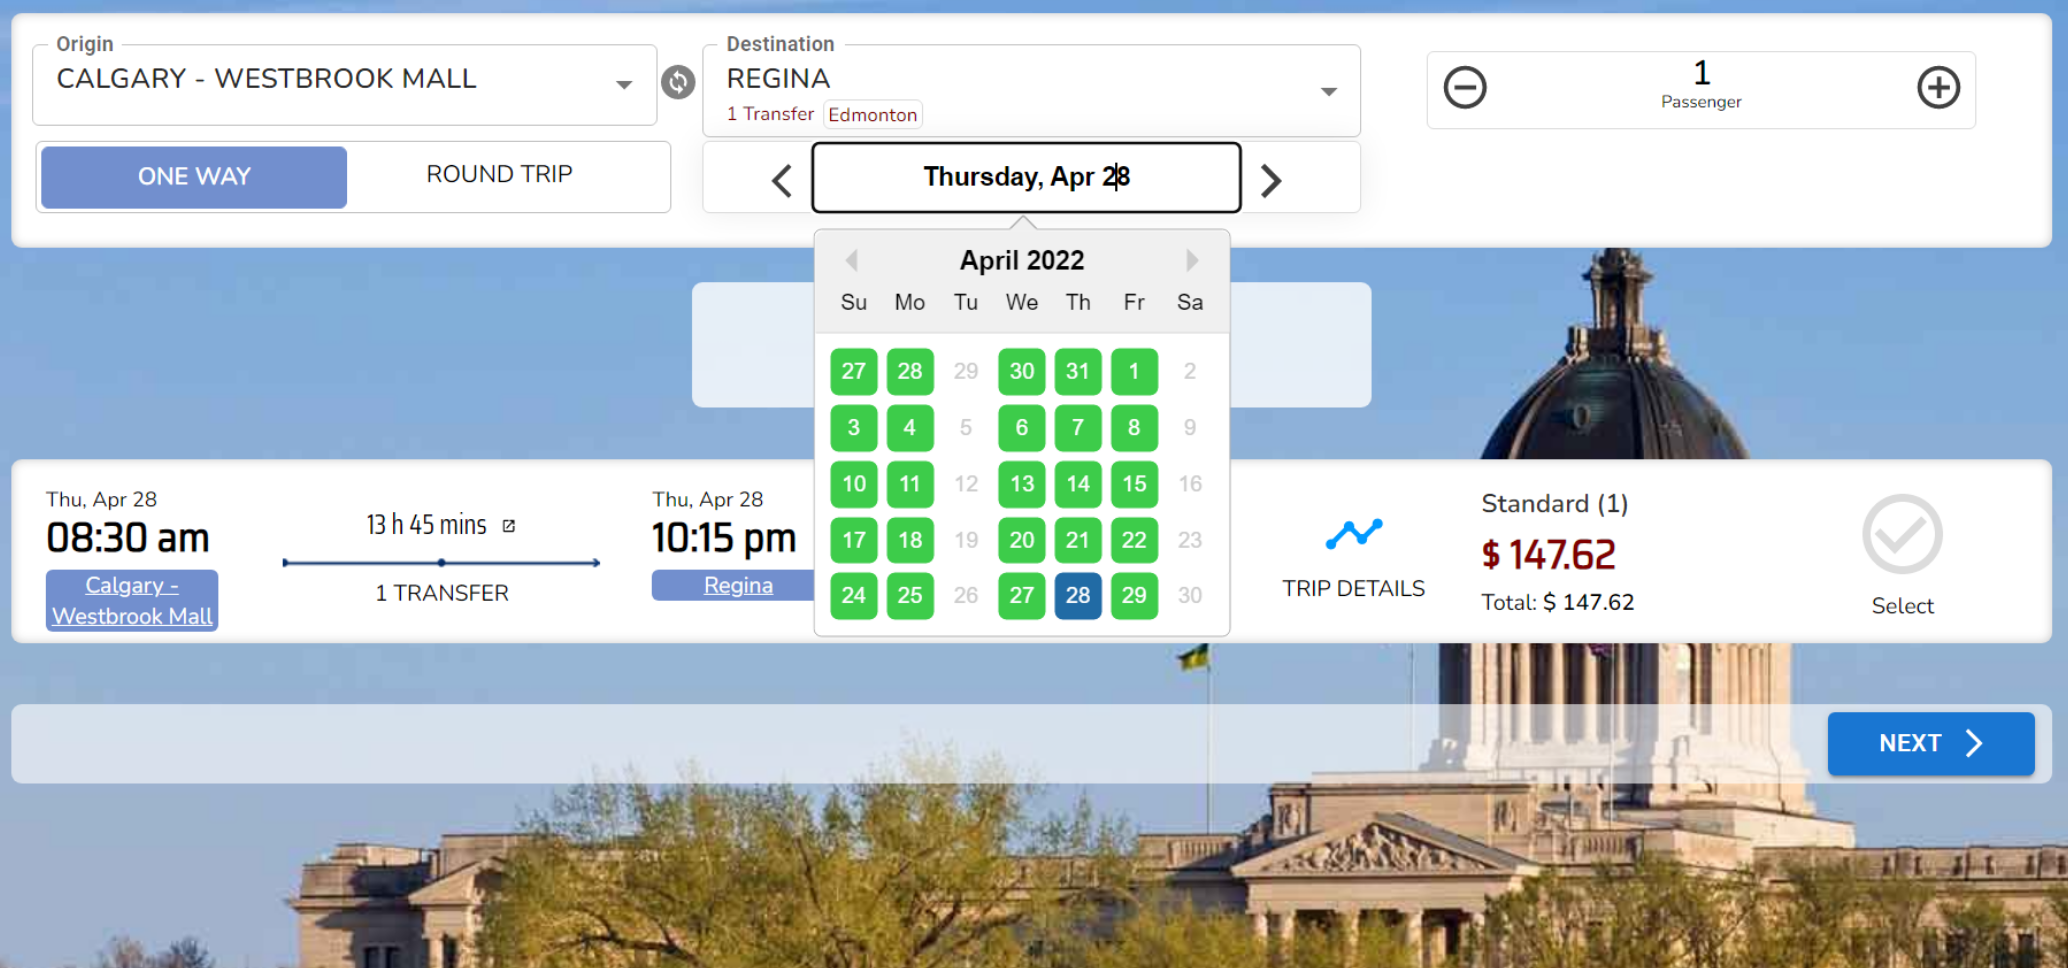 Ticpoi makes bus ticket purchase easier with availability calendar. It shows the available dates and does not allow to select a wrong date. Shows all possible destination bus stations with connection options and show how many connections required.